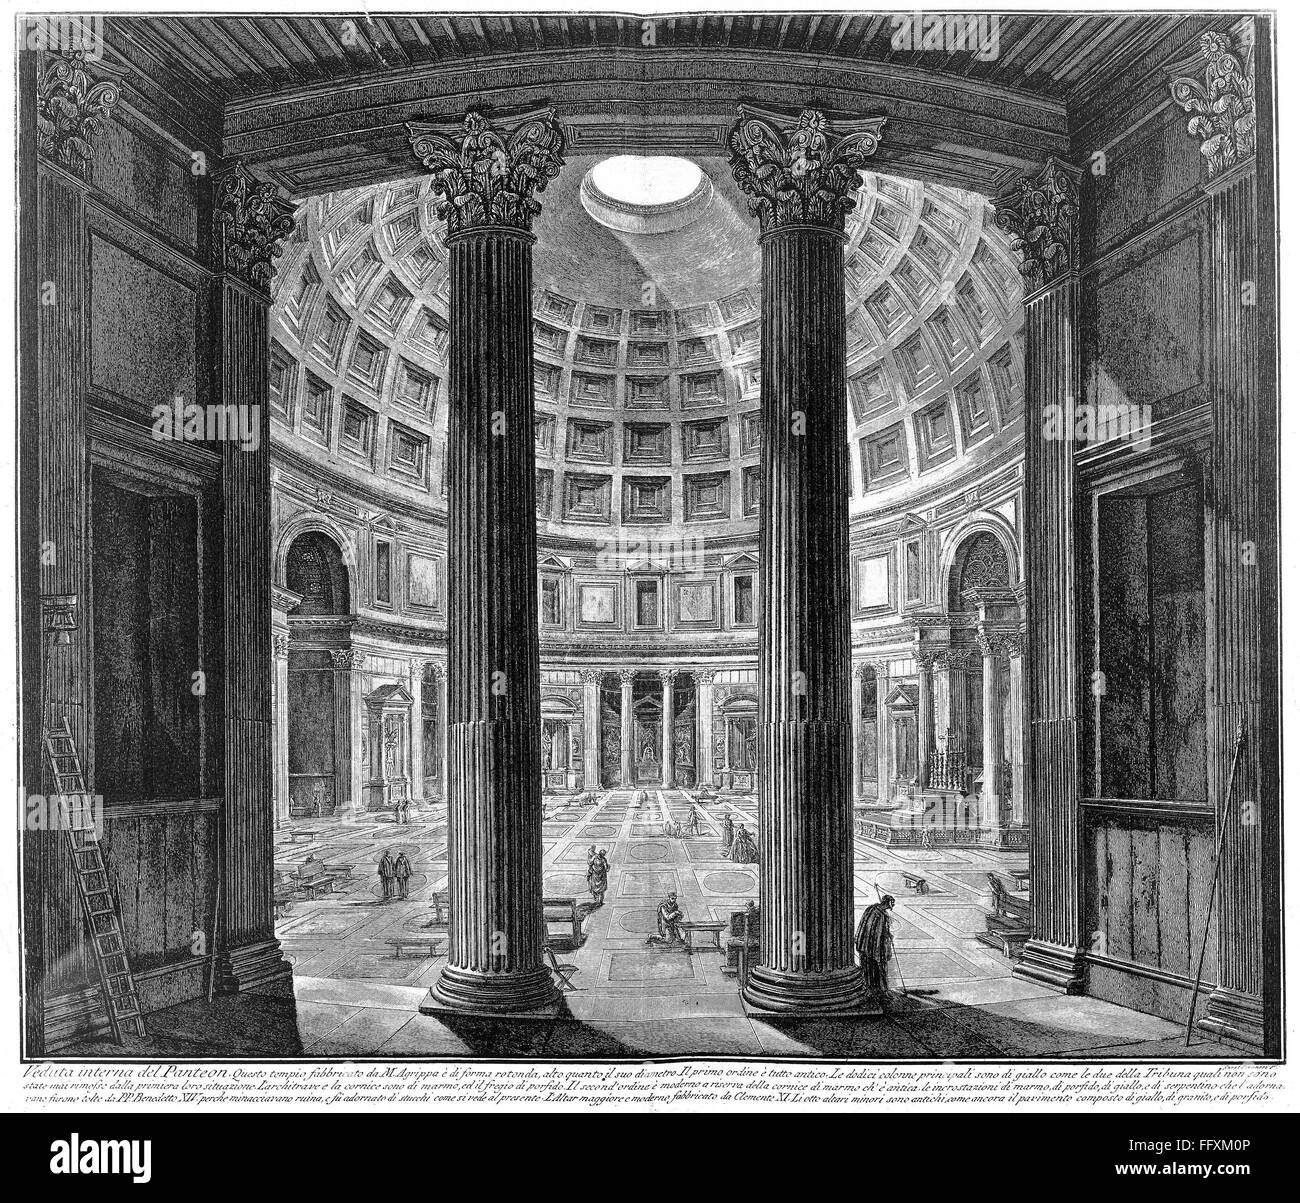 ROME: PANTHEON. /nInterior of the Pantheon in Rome. Etching and engraving by Giovanni Battista Piranesi, c1756. Stock Photo